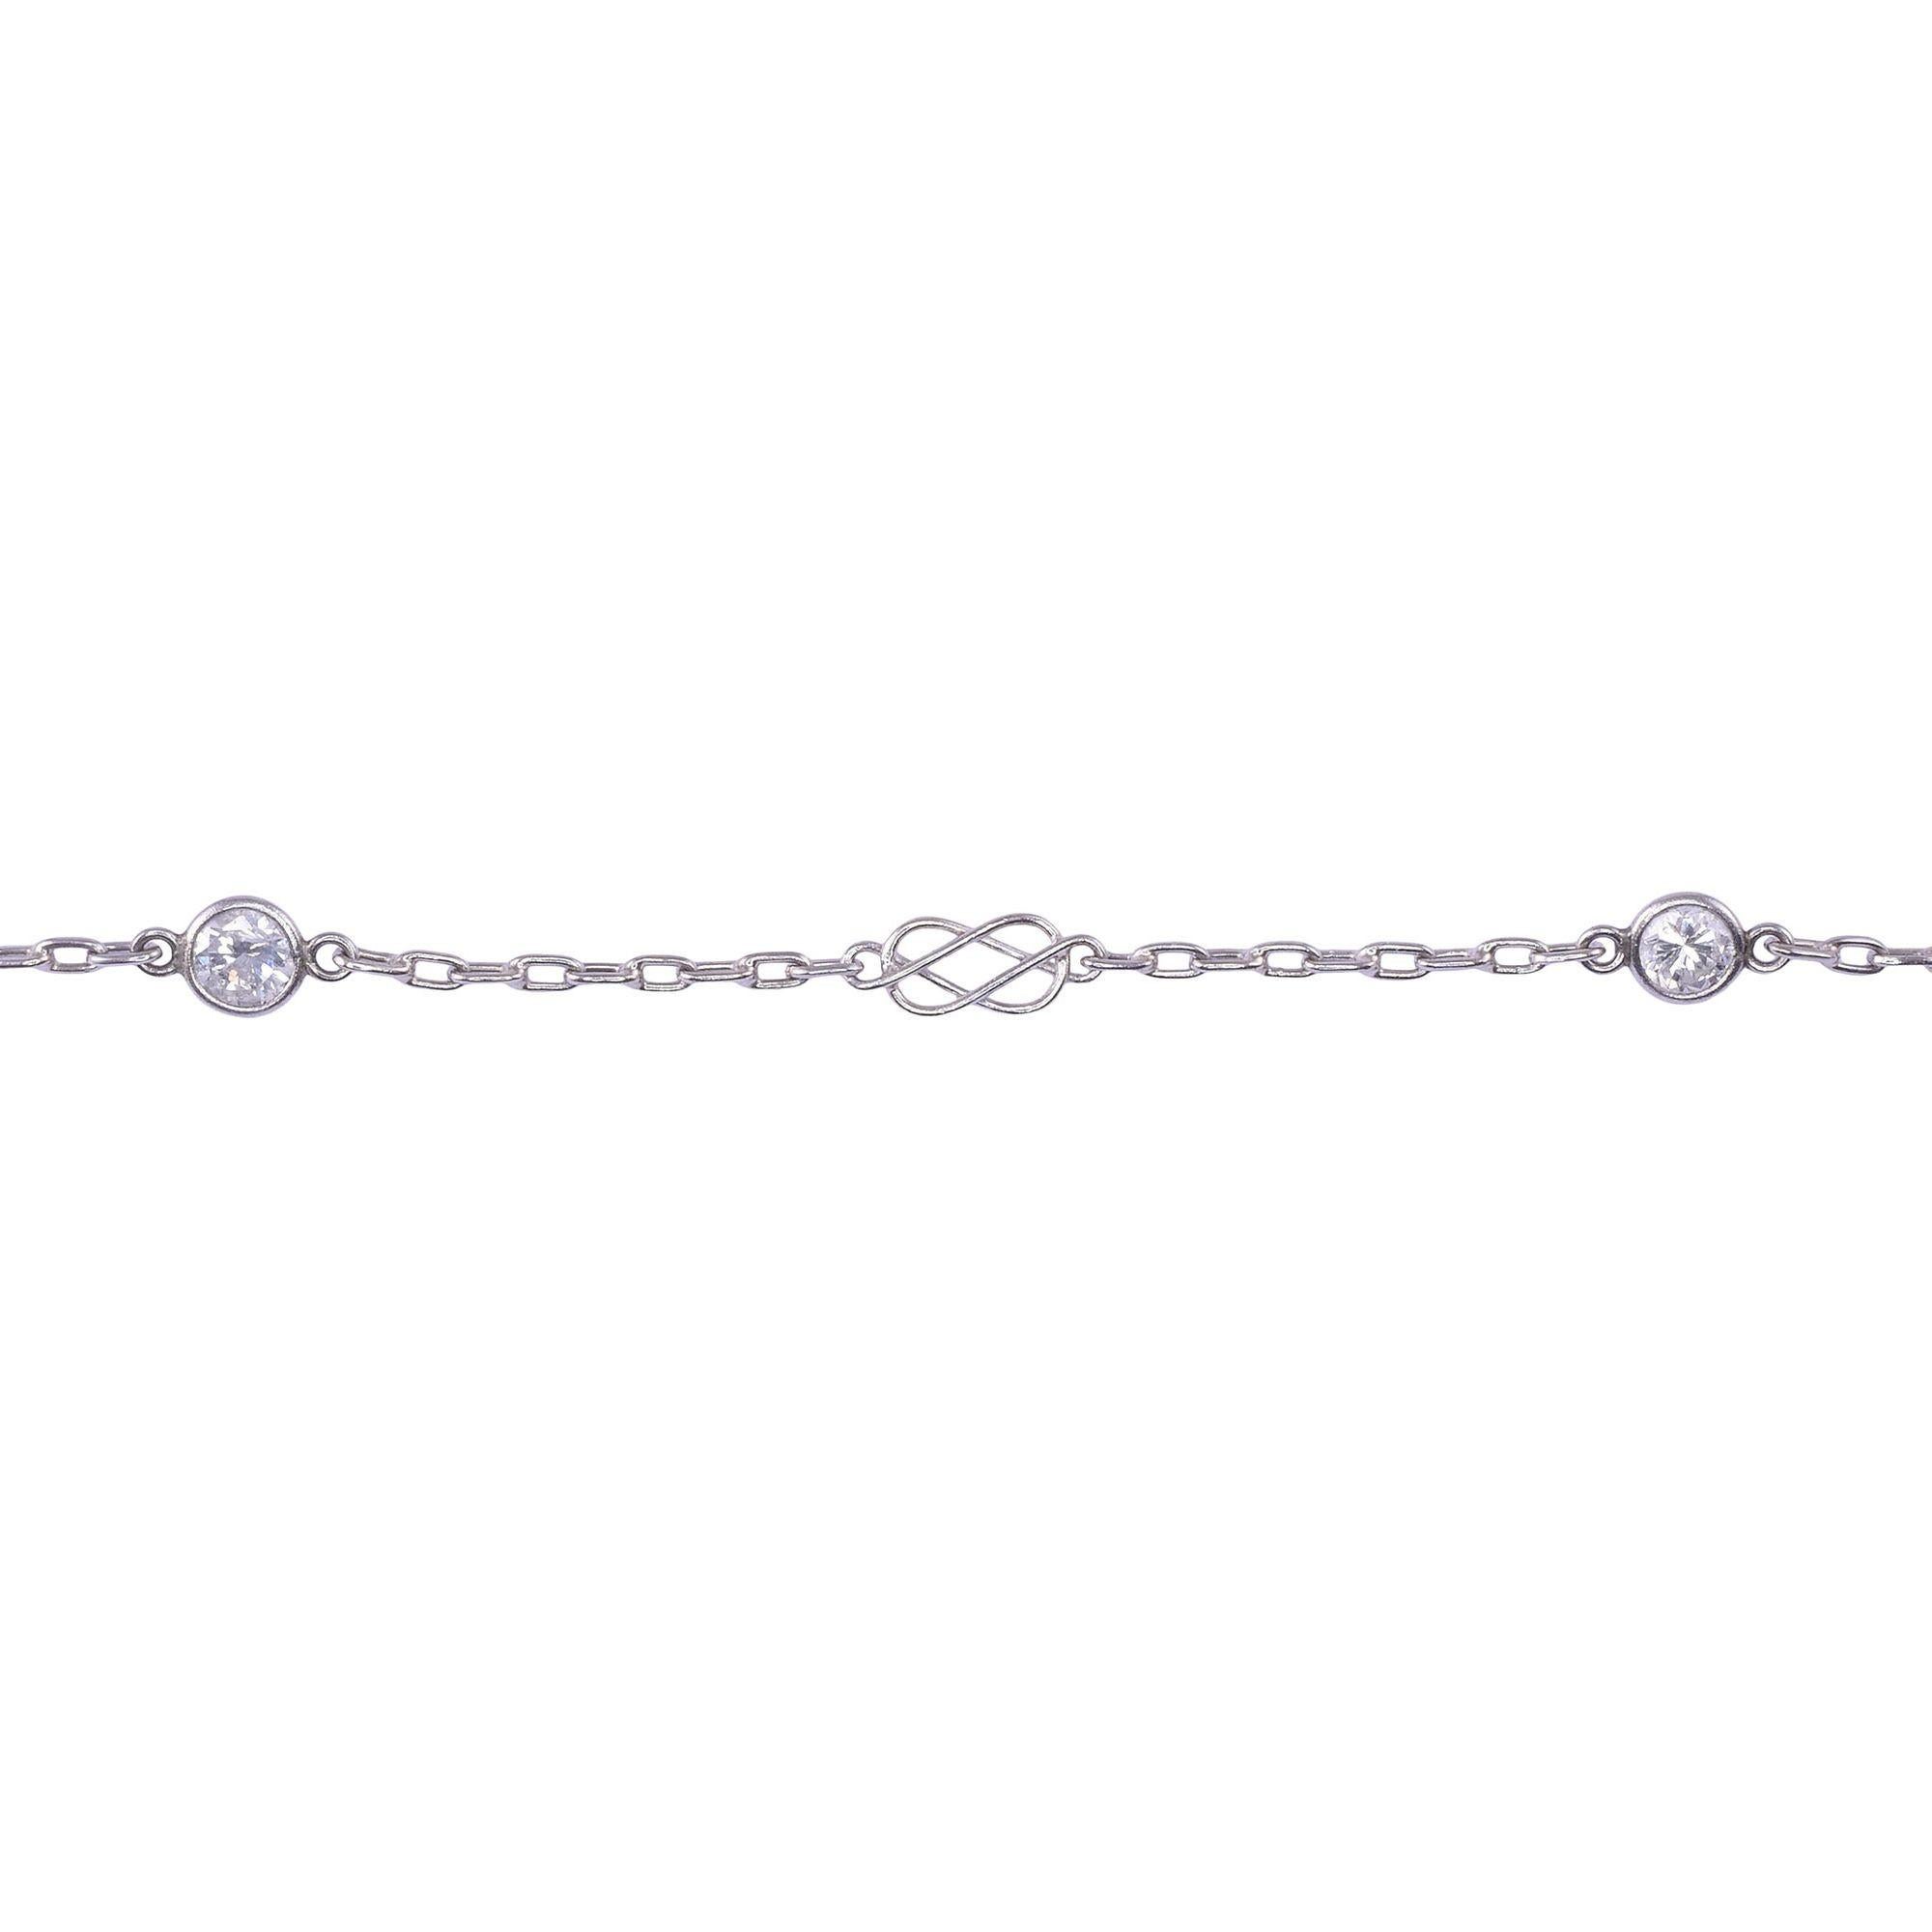 Antique 50 inch diamond platinum chain necklace, circa 1920. This hand made platinum chain features 30 bezel set round brilliant cut diamonds from 2.7-2.8mm. The diamond have VS2-I1 clarity and I-J color. There are also decorative links in between